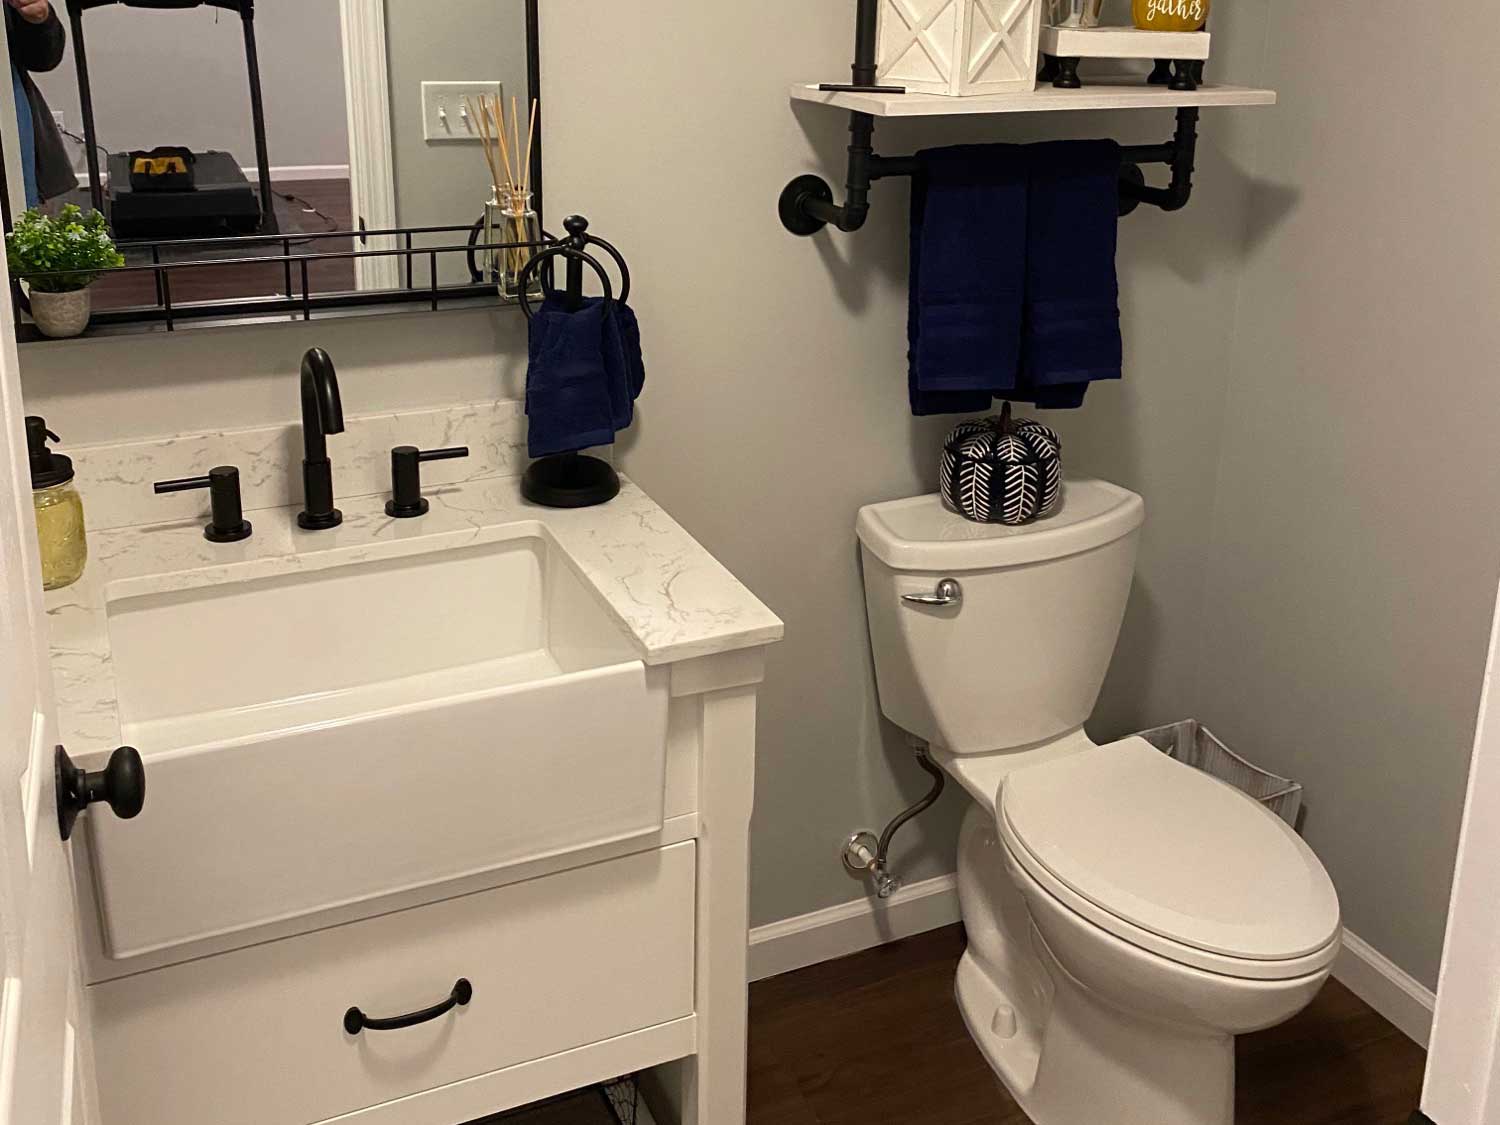 The Basic Bathroom Co. - half bathroom installation including a sink, faucet, toilet, and plumbing for a half bathroom build in a finished basement in Barnegat, New Jersey – November 2022